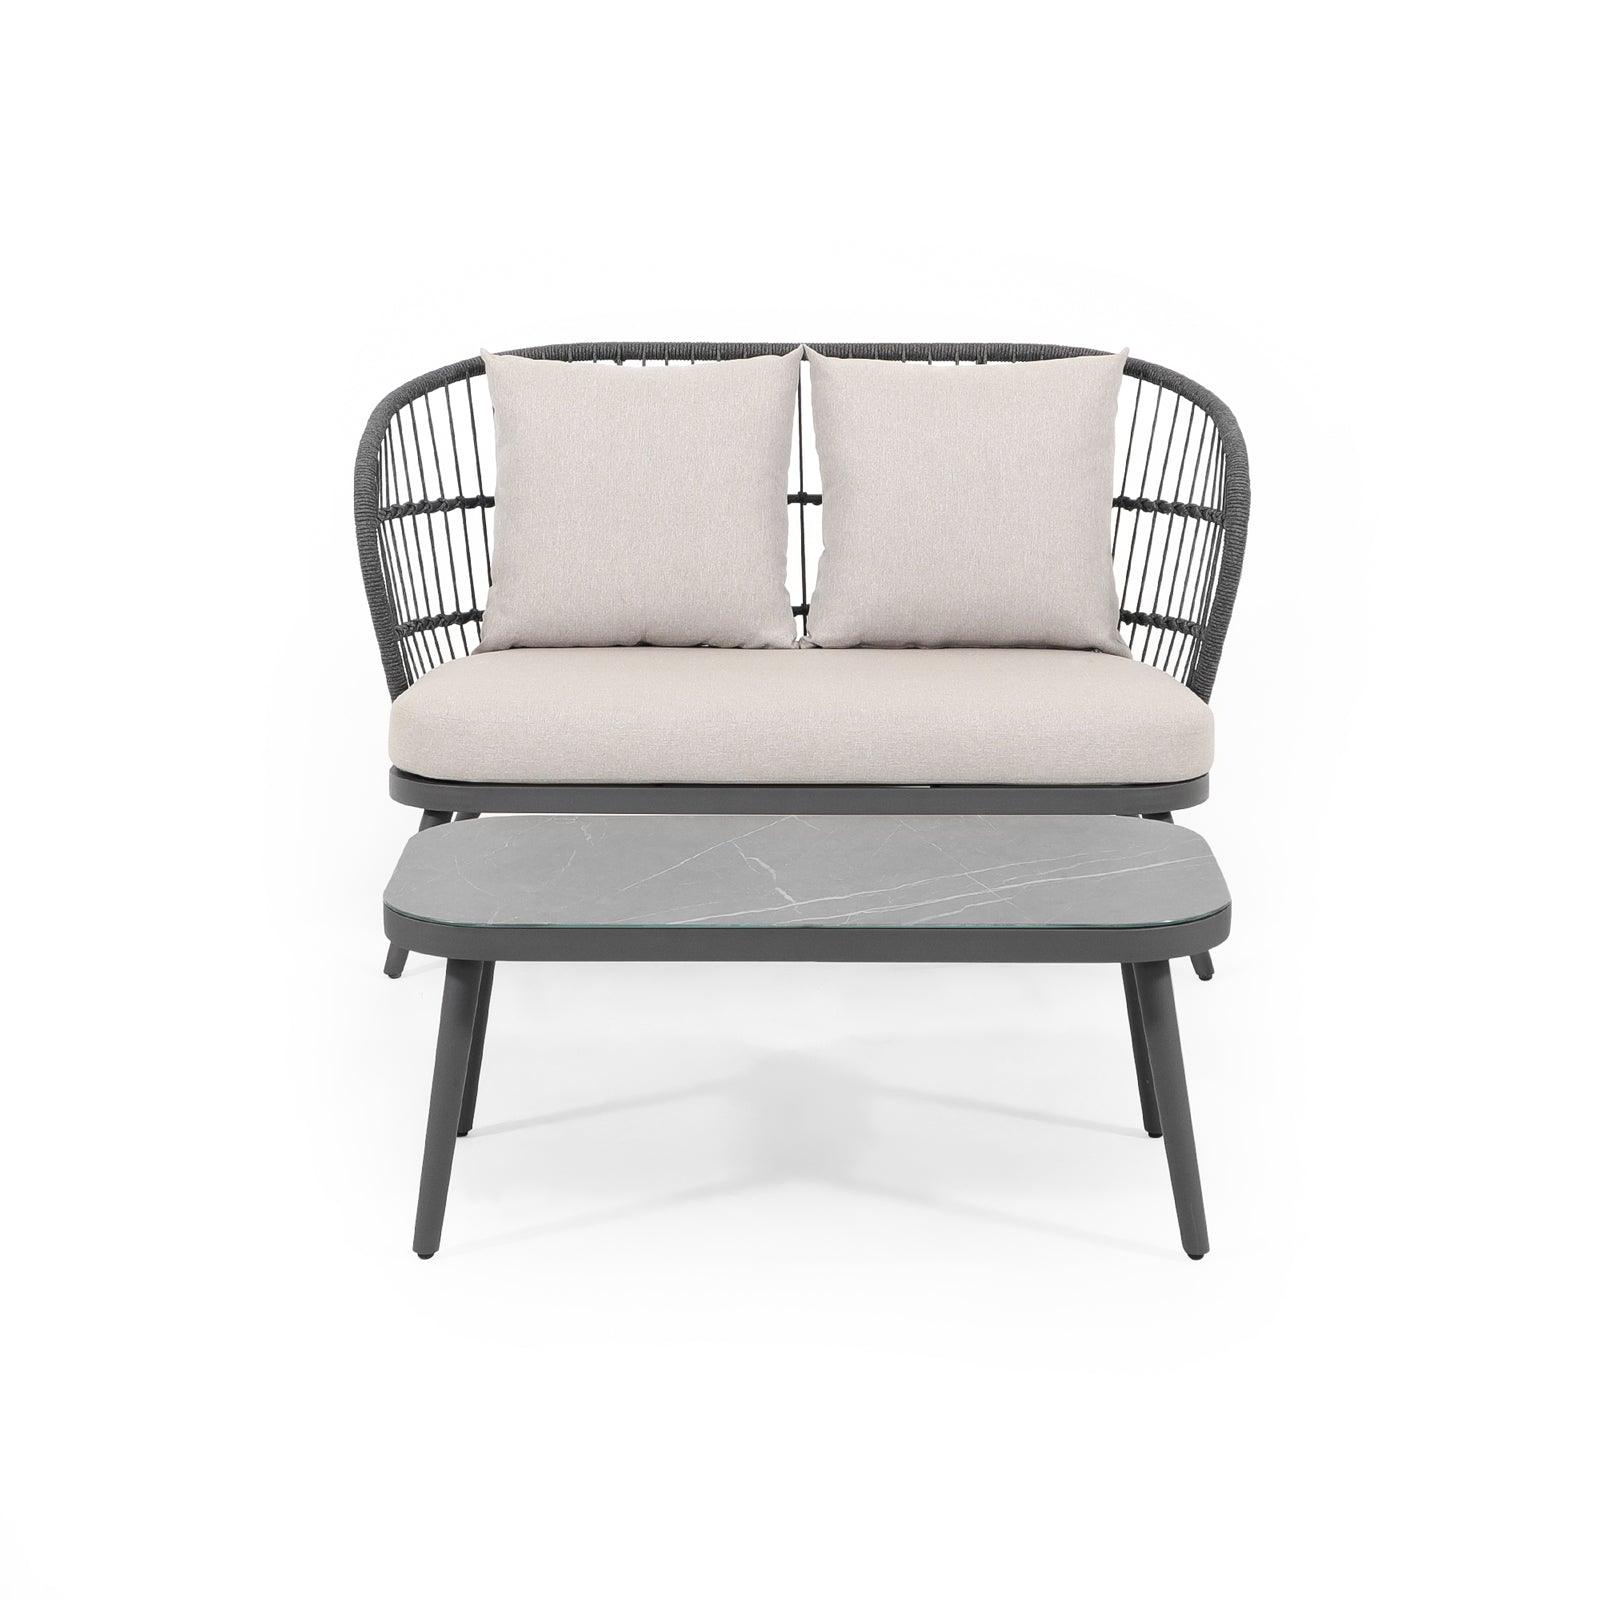 Comino Modern Rope Outdoor Furniture, 2-piece dark grey loveseat set with aluminum frame, backrest rope design, light grey cushions, 1 loveseat, 1 Ceramic Tempered Glass Tabletop Coffee Table - Jardina Furniture